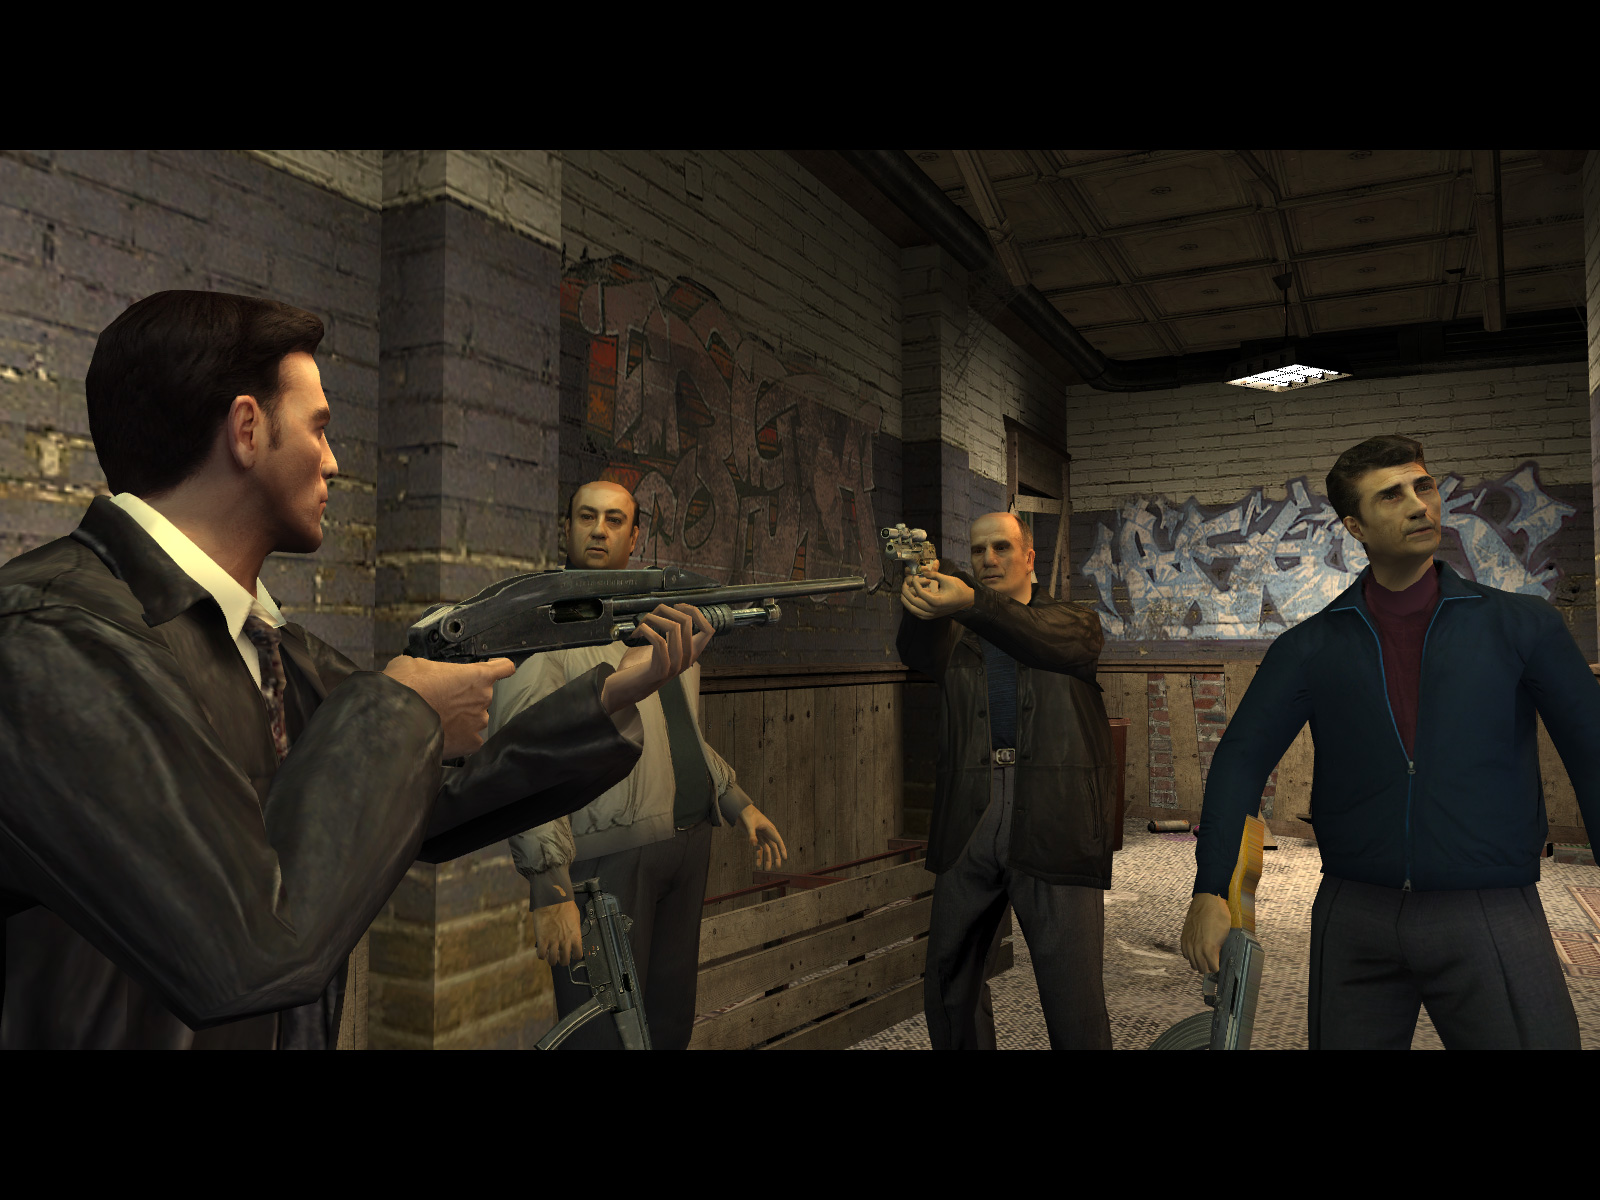 Max Payne 3: How a monstrously hard video game made me a better person.